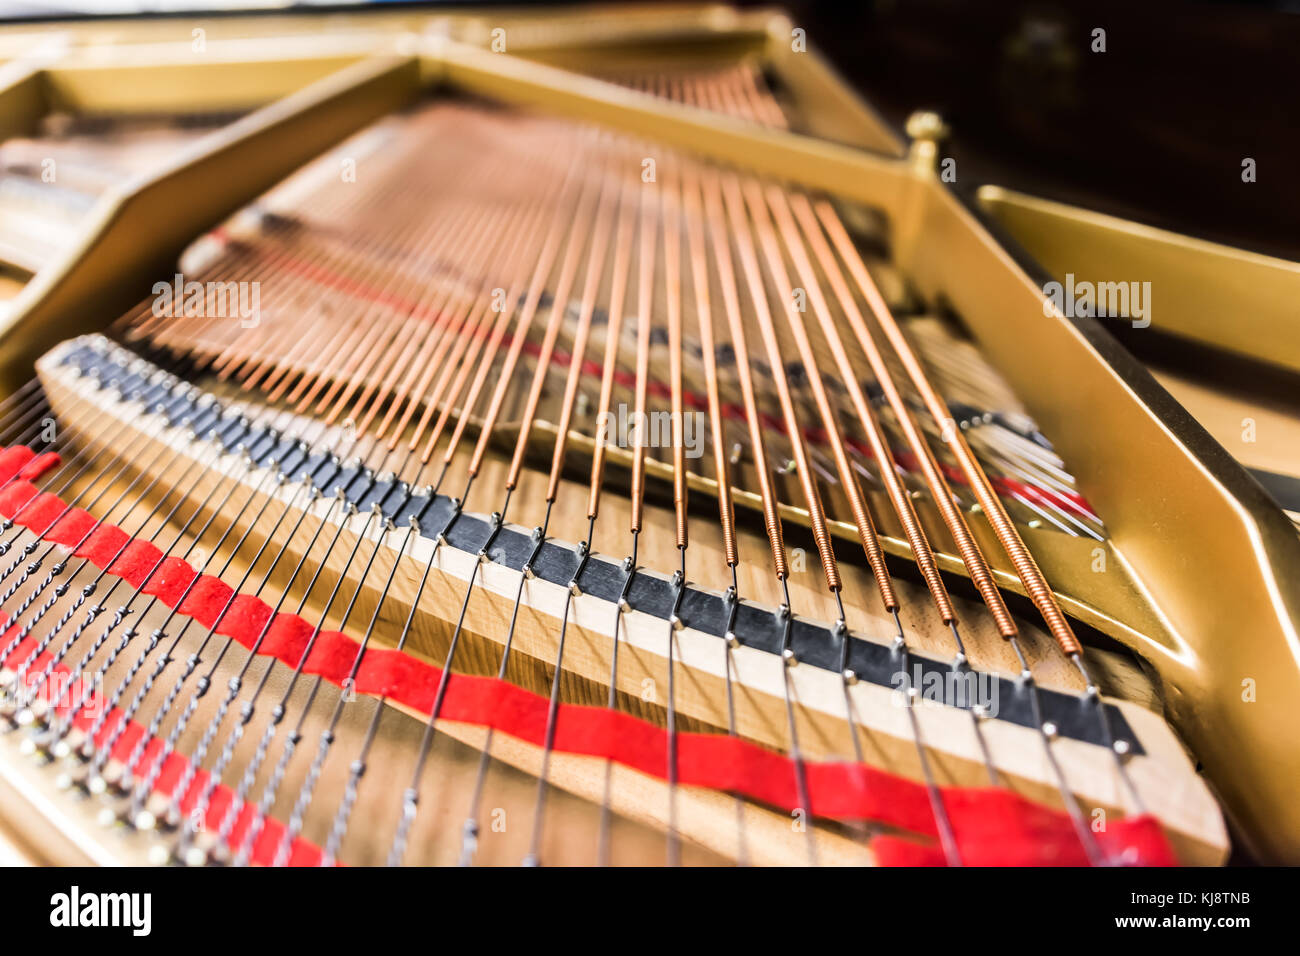 Lines of coiled bass strings inside grand piano Stock Photo